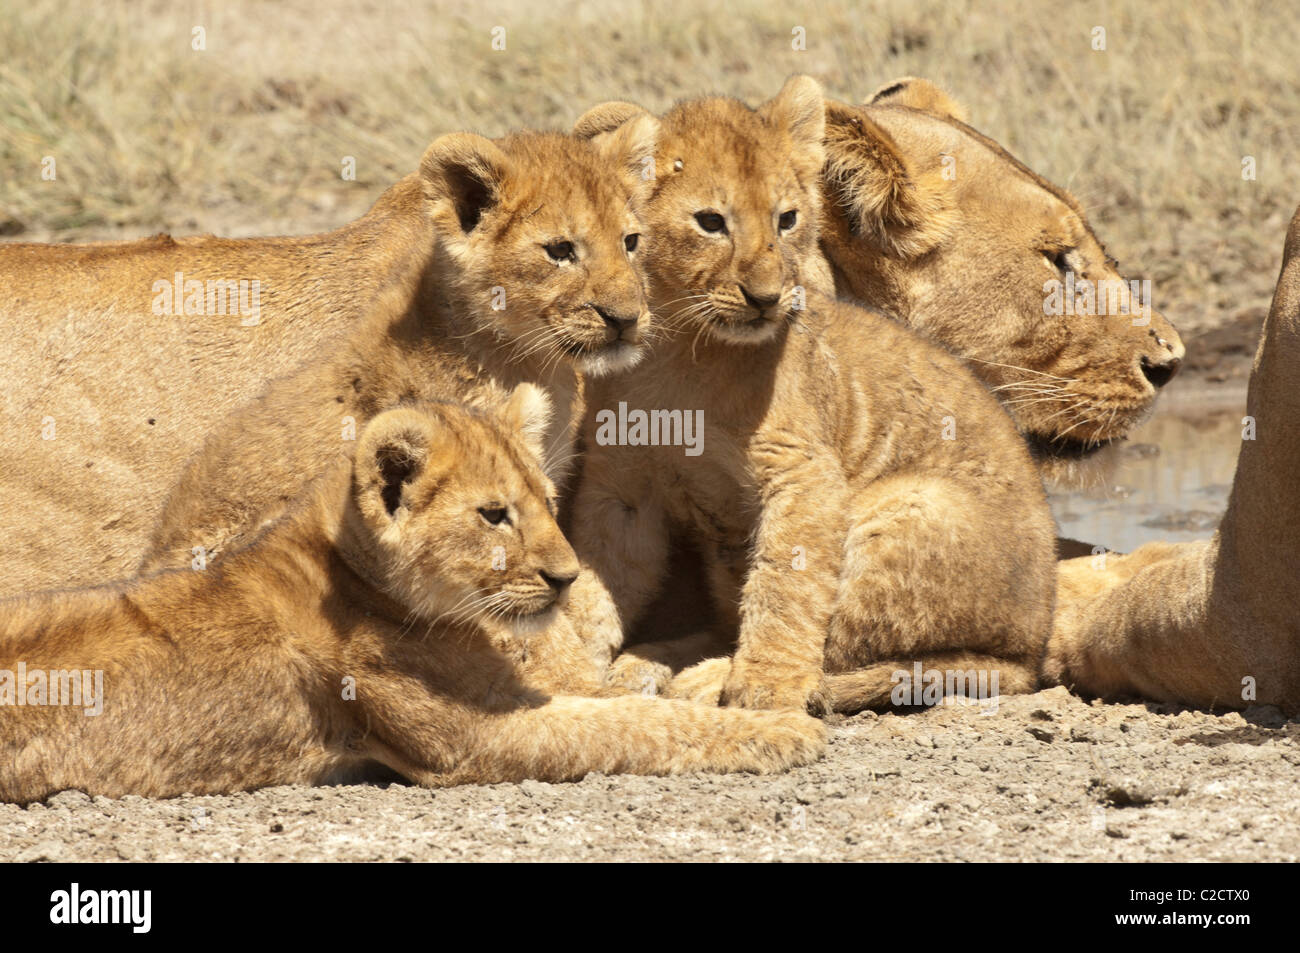 Stock photo of three lion cubs sitting by their mom. Stock Photo